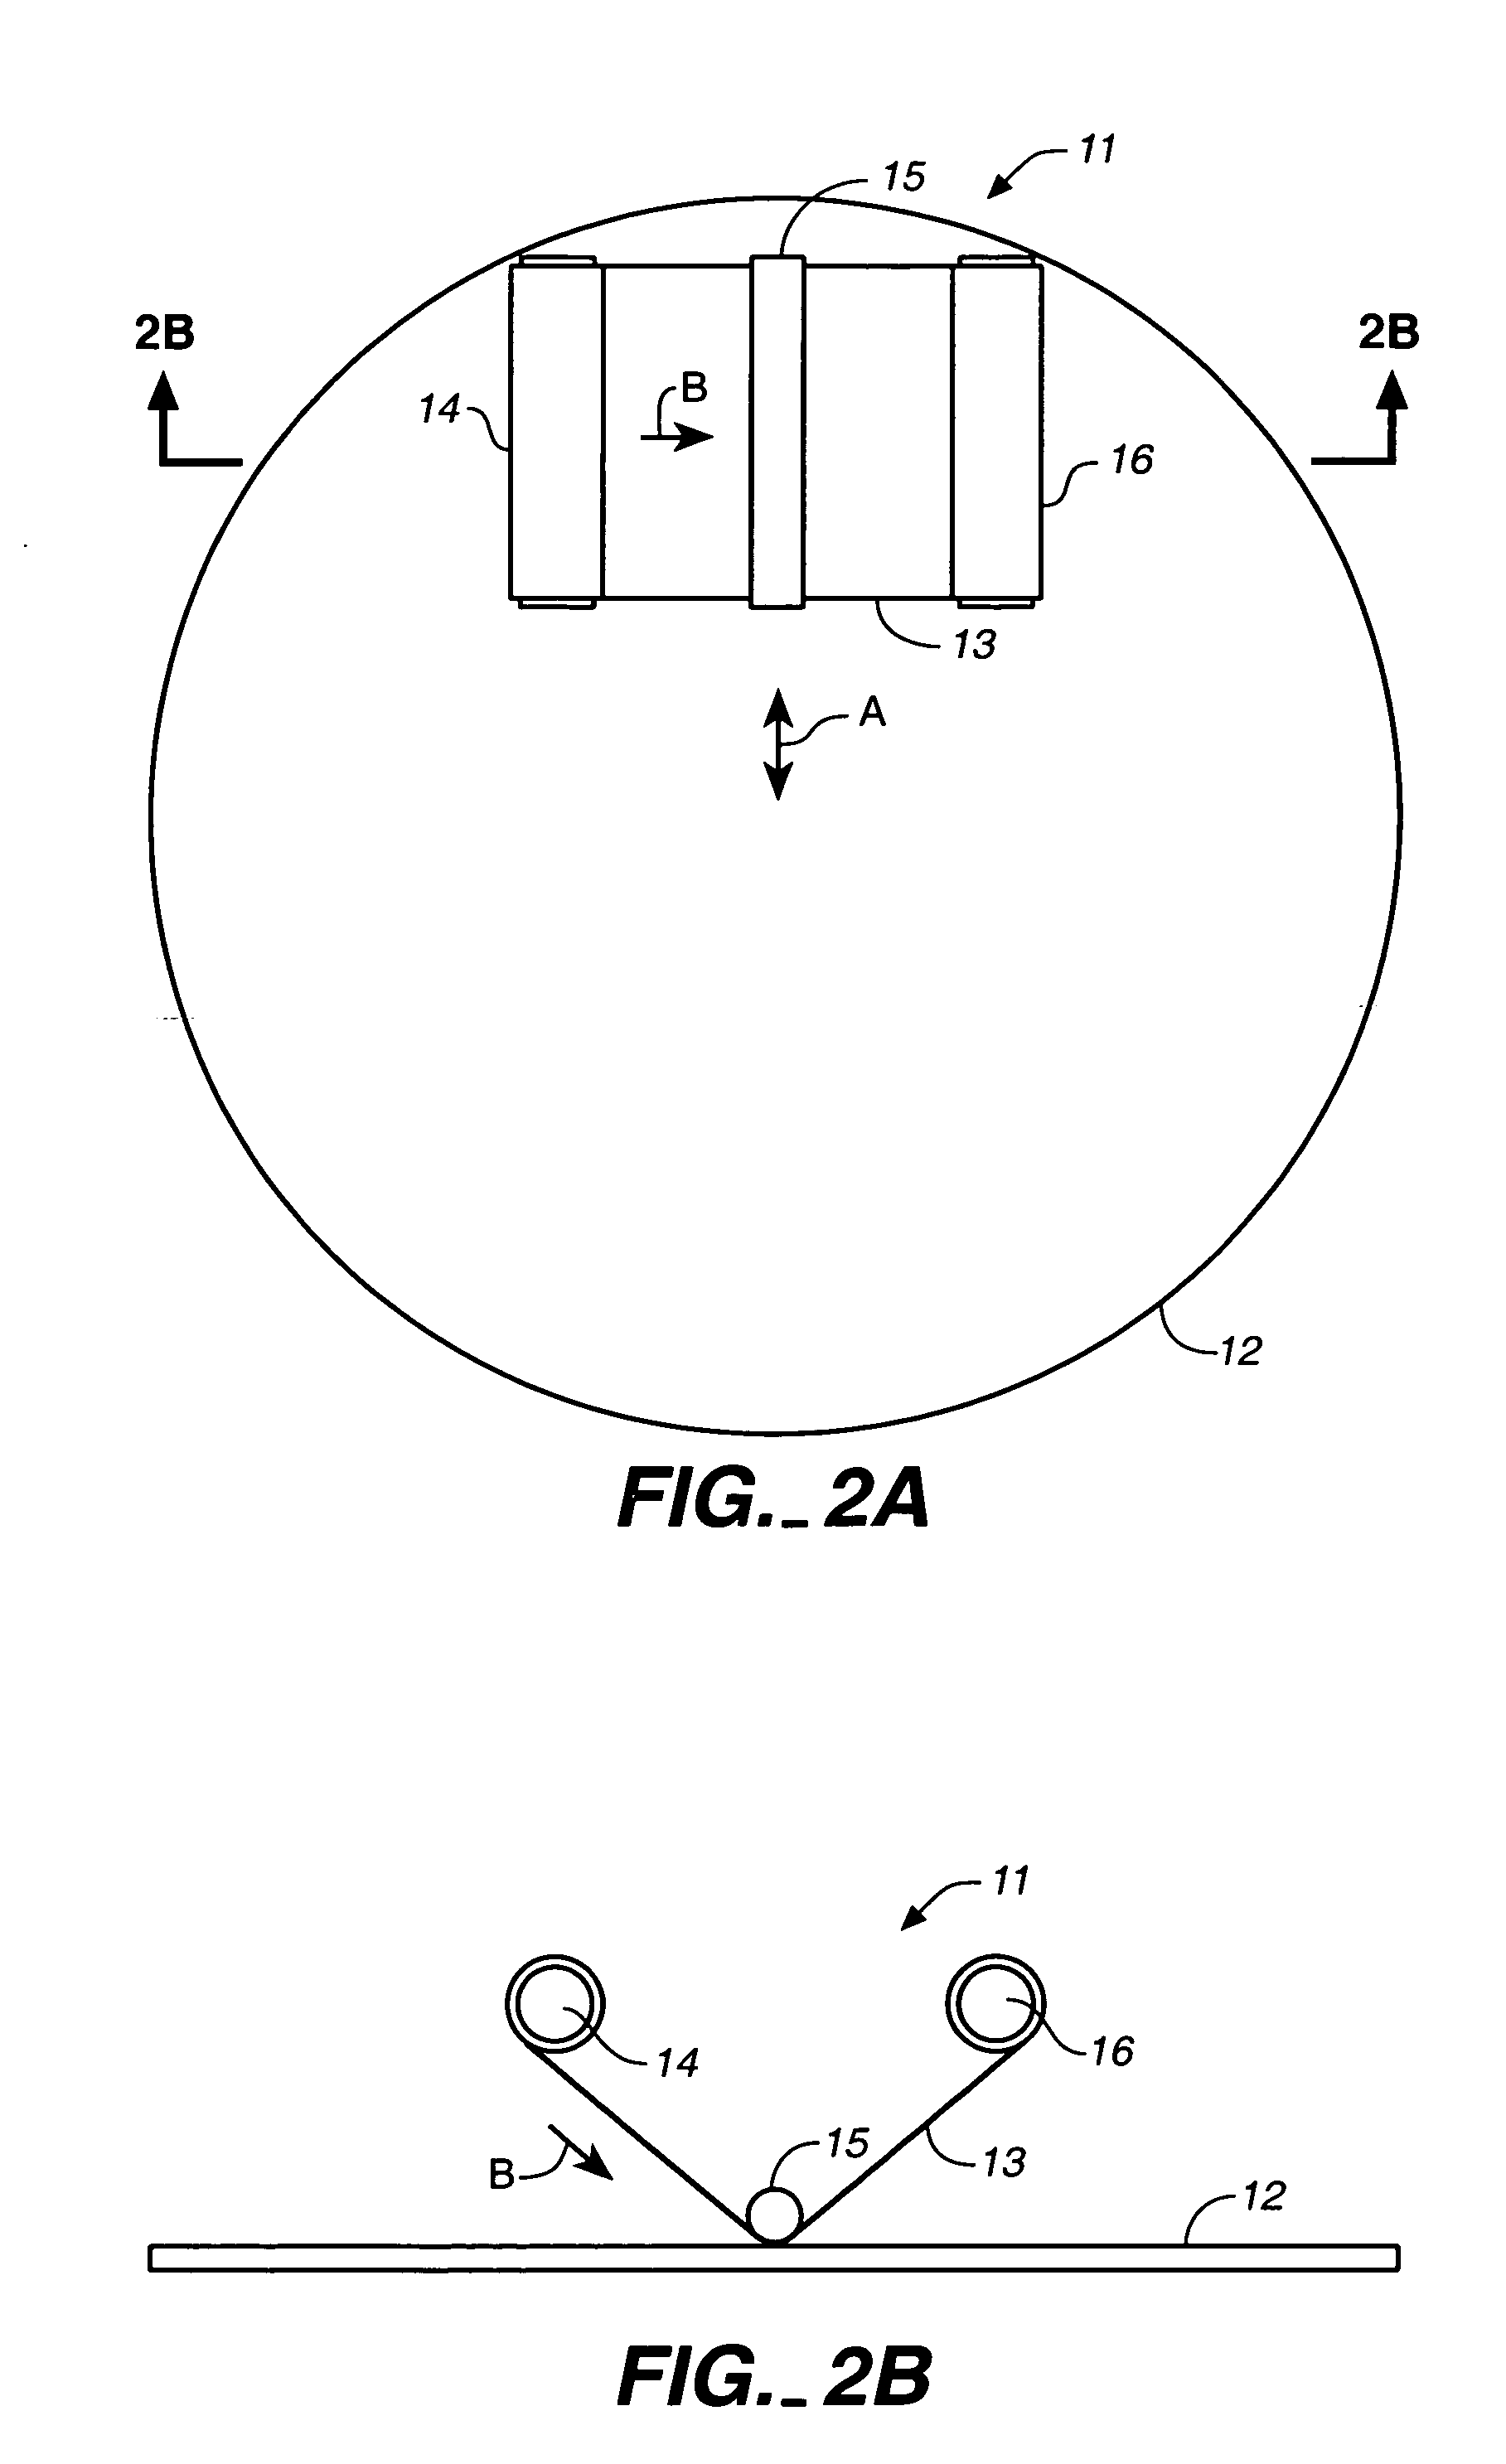 Texturing of magnetic disk substrates